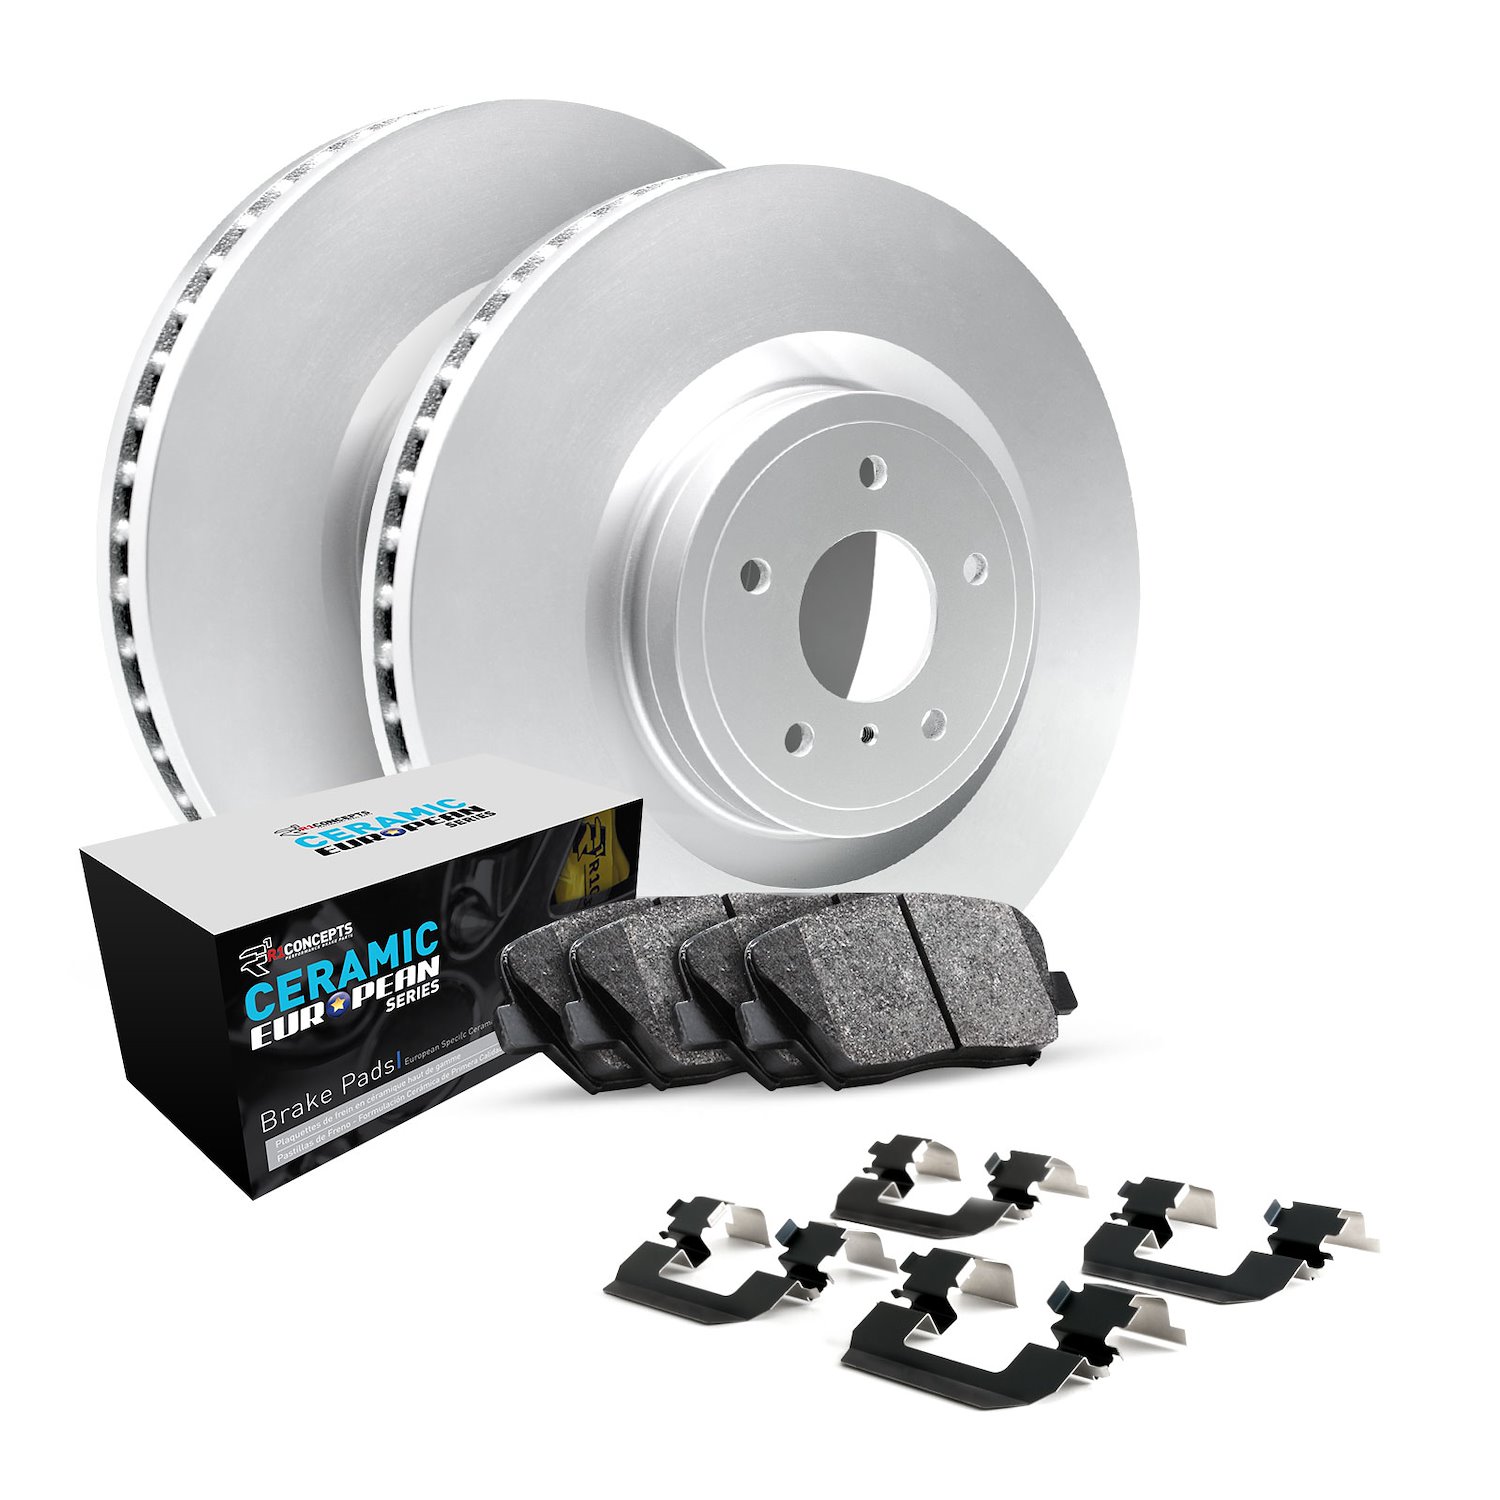 GEO-Carbon Brake Rotor Set w/Euro Ceramic Pads & Hardware, Fits Select Fits Multiple Makes/Models, Position: Rear